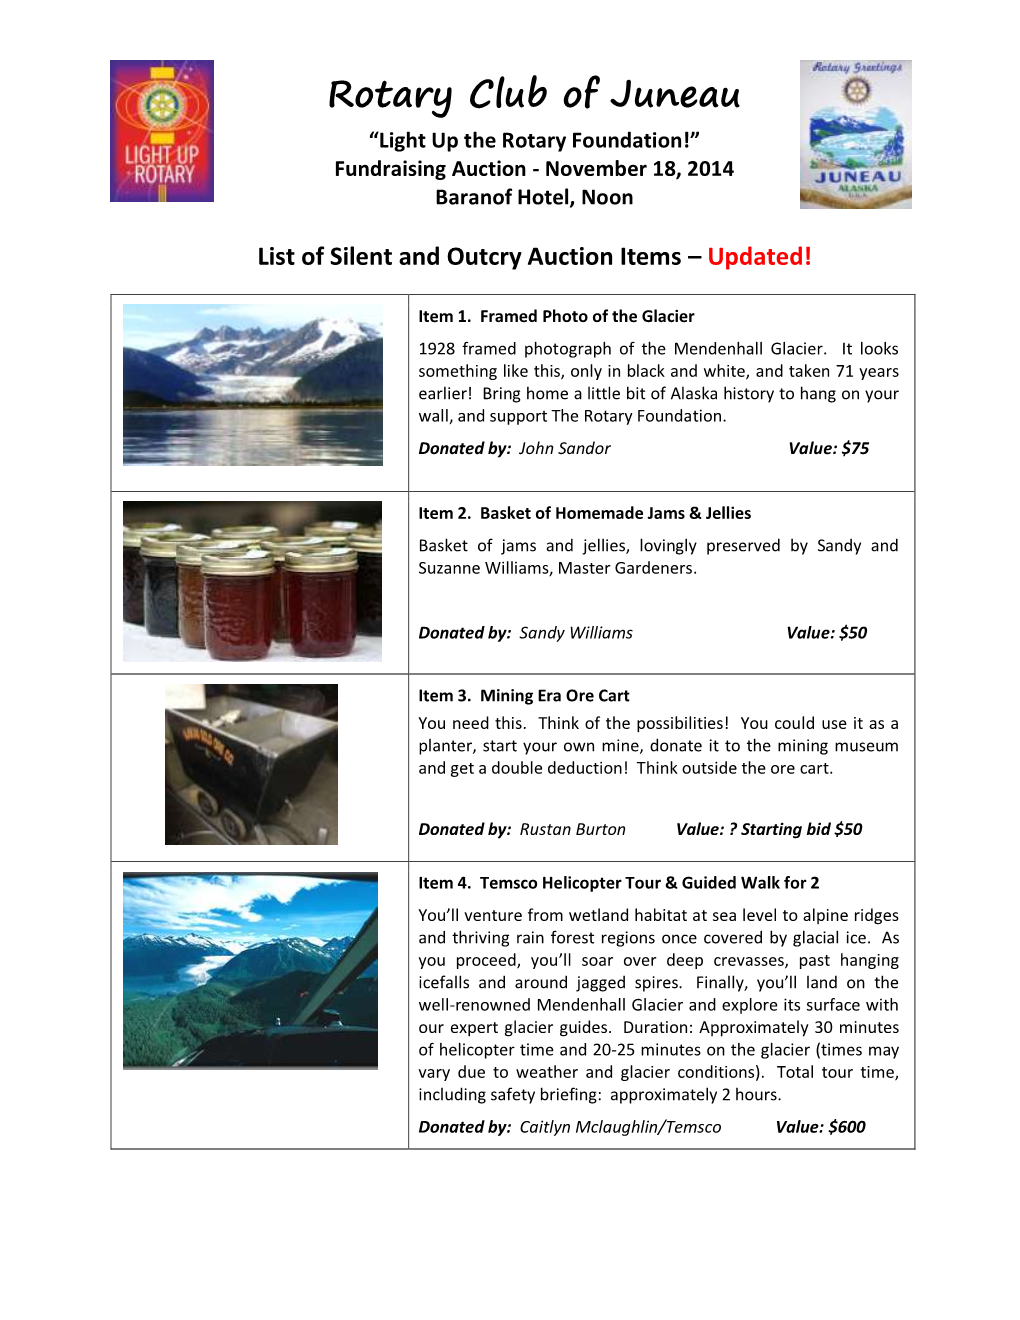 Rotary Club of Juneau “Light up the Rotary Foundation!” Fundraising Auction - November 18, 2014